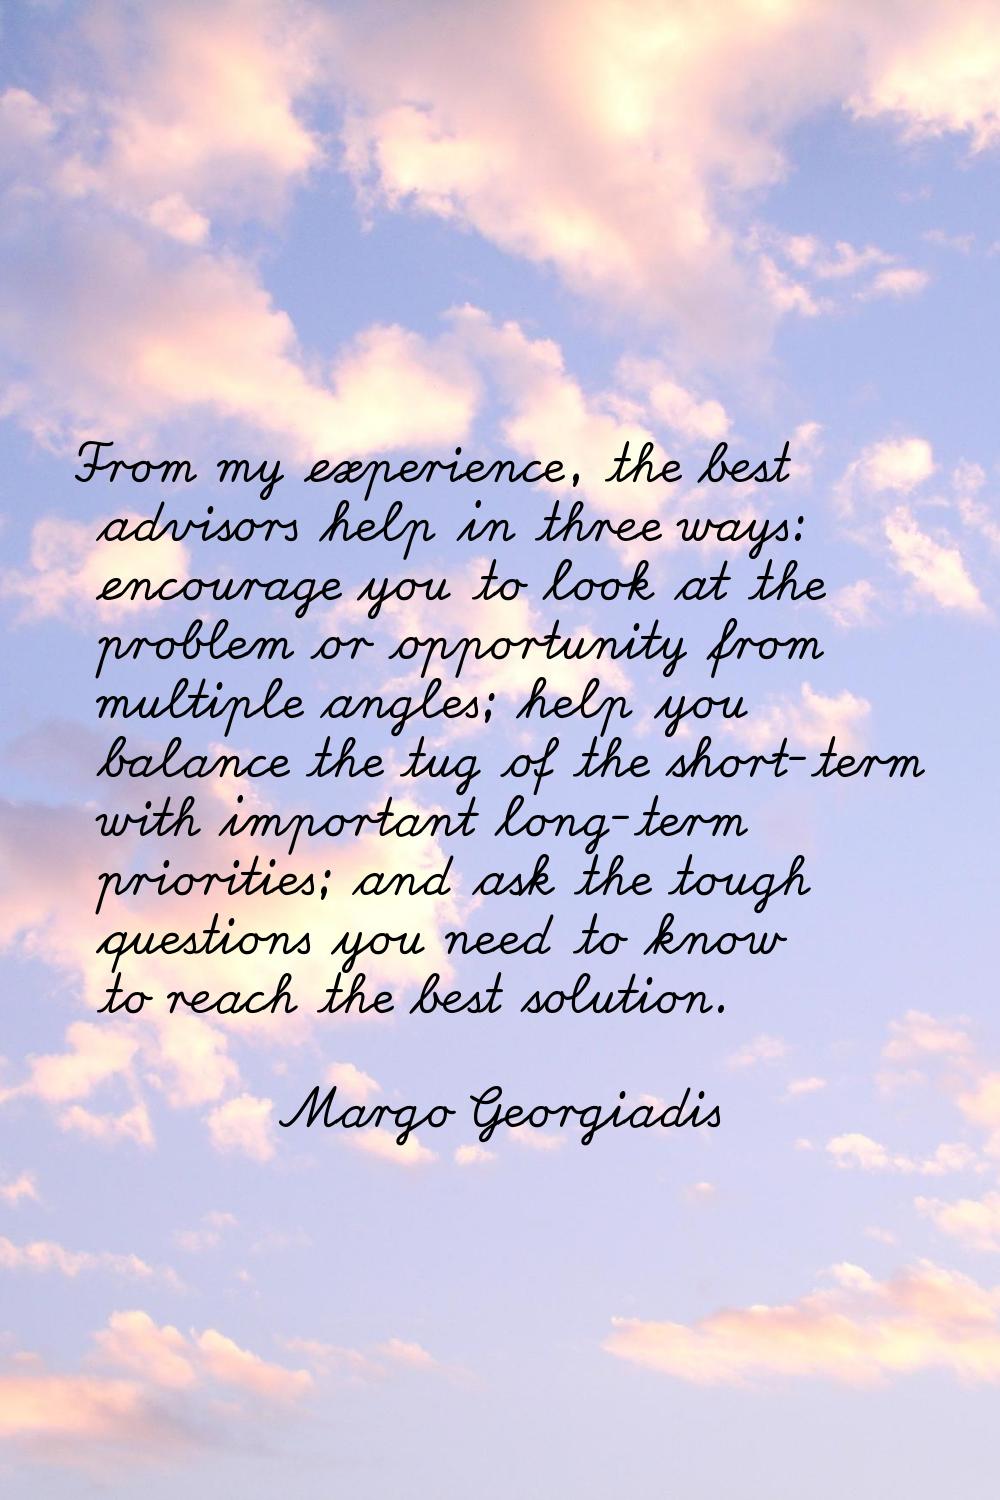 From my experience, the best advisors help in three ways: encourage you to look at the problem or o